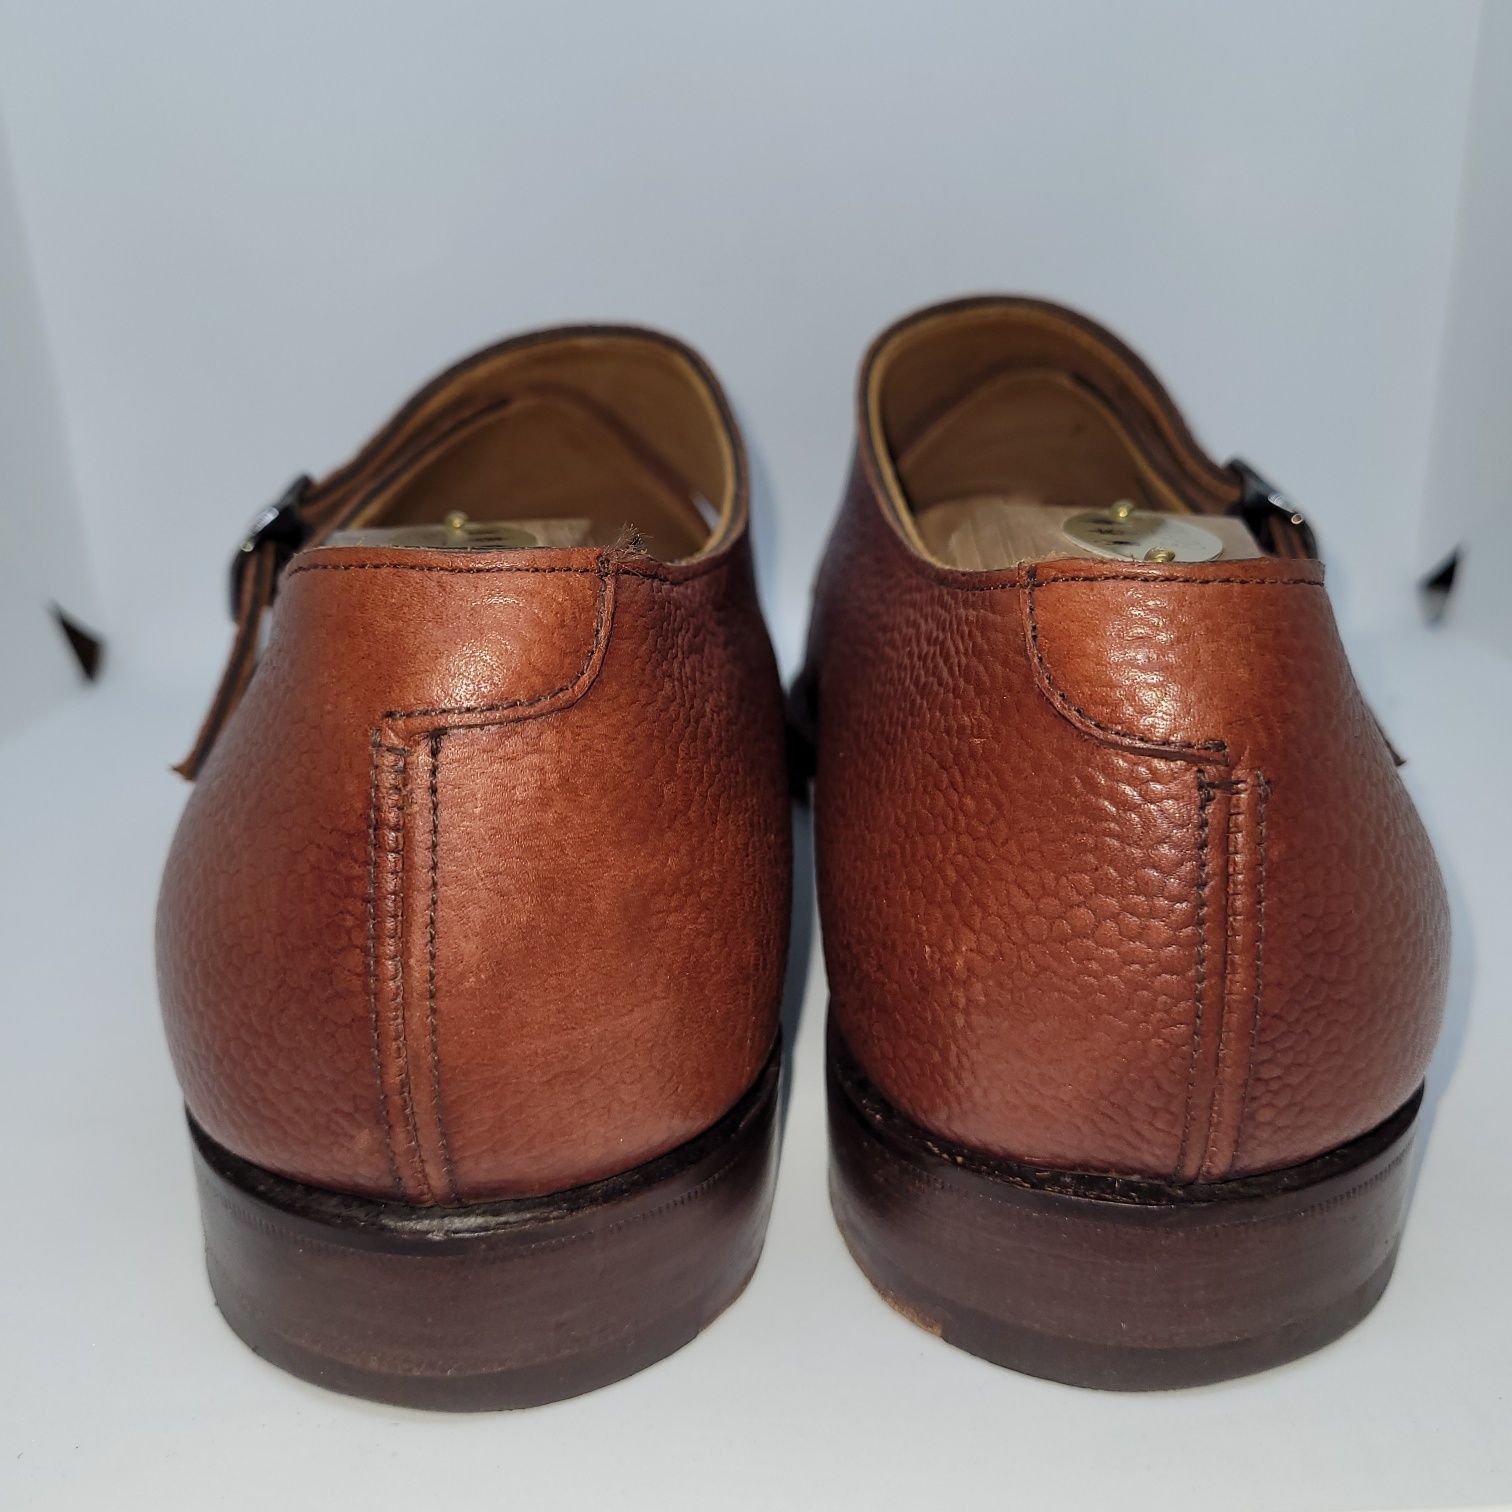 Joseph Cheaney Oxted Monk Shoe in Bronze Rub Off Grain, UK 10 F